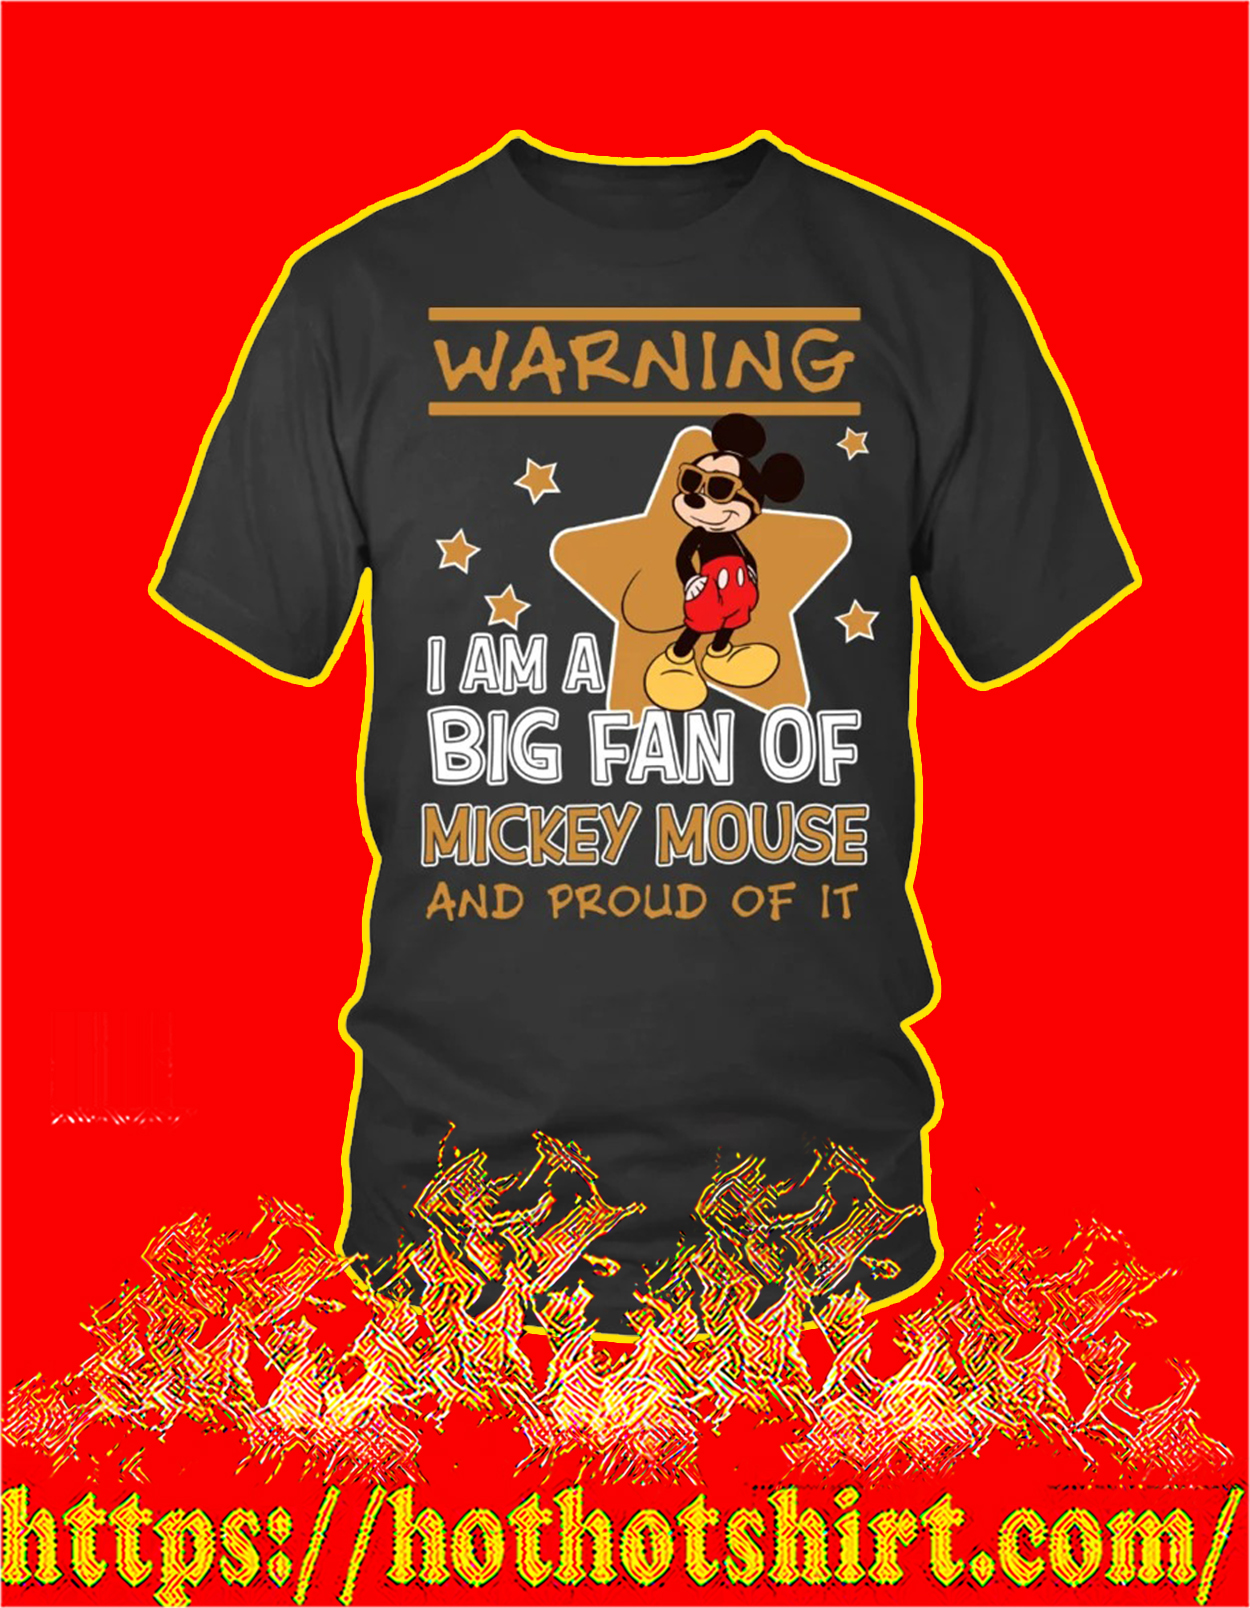 Warning I’m a big fan of mickey mouse and proud of it shirt, sweatshirt and tank top